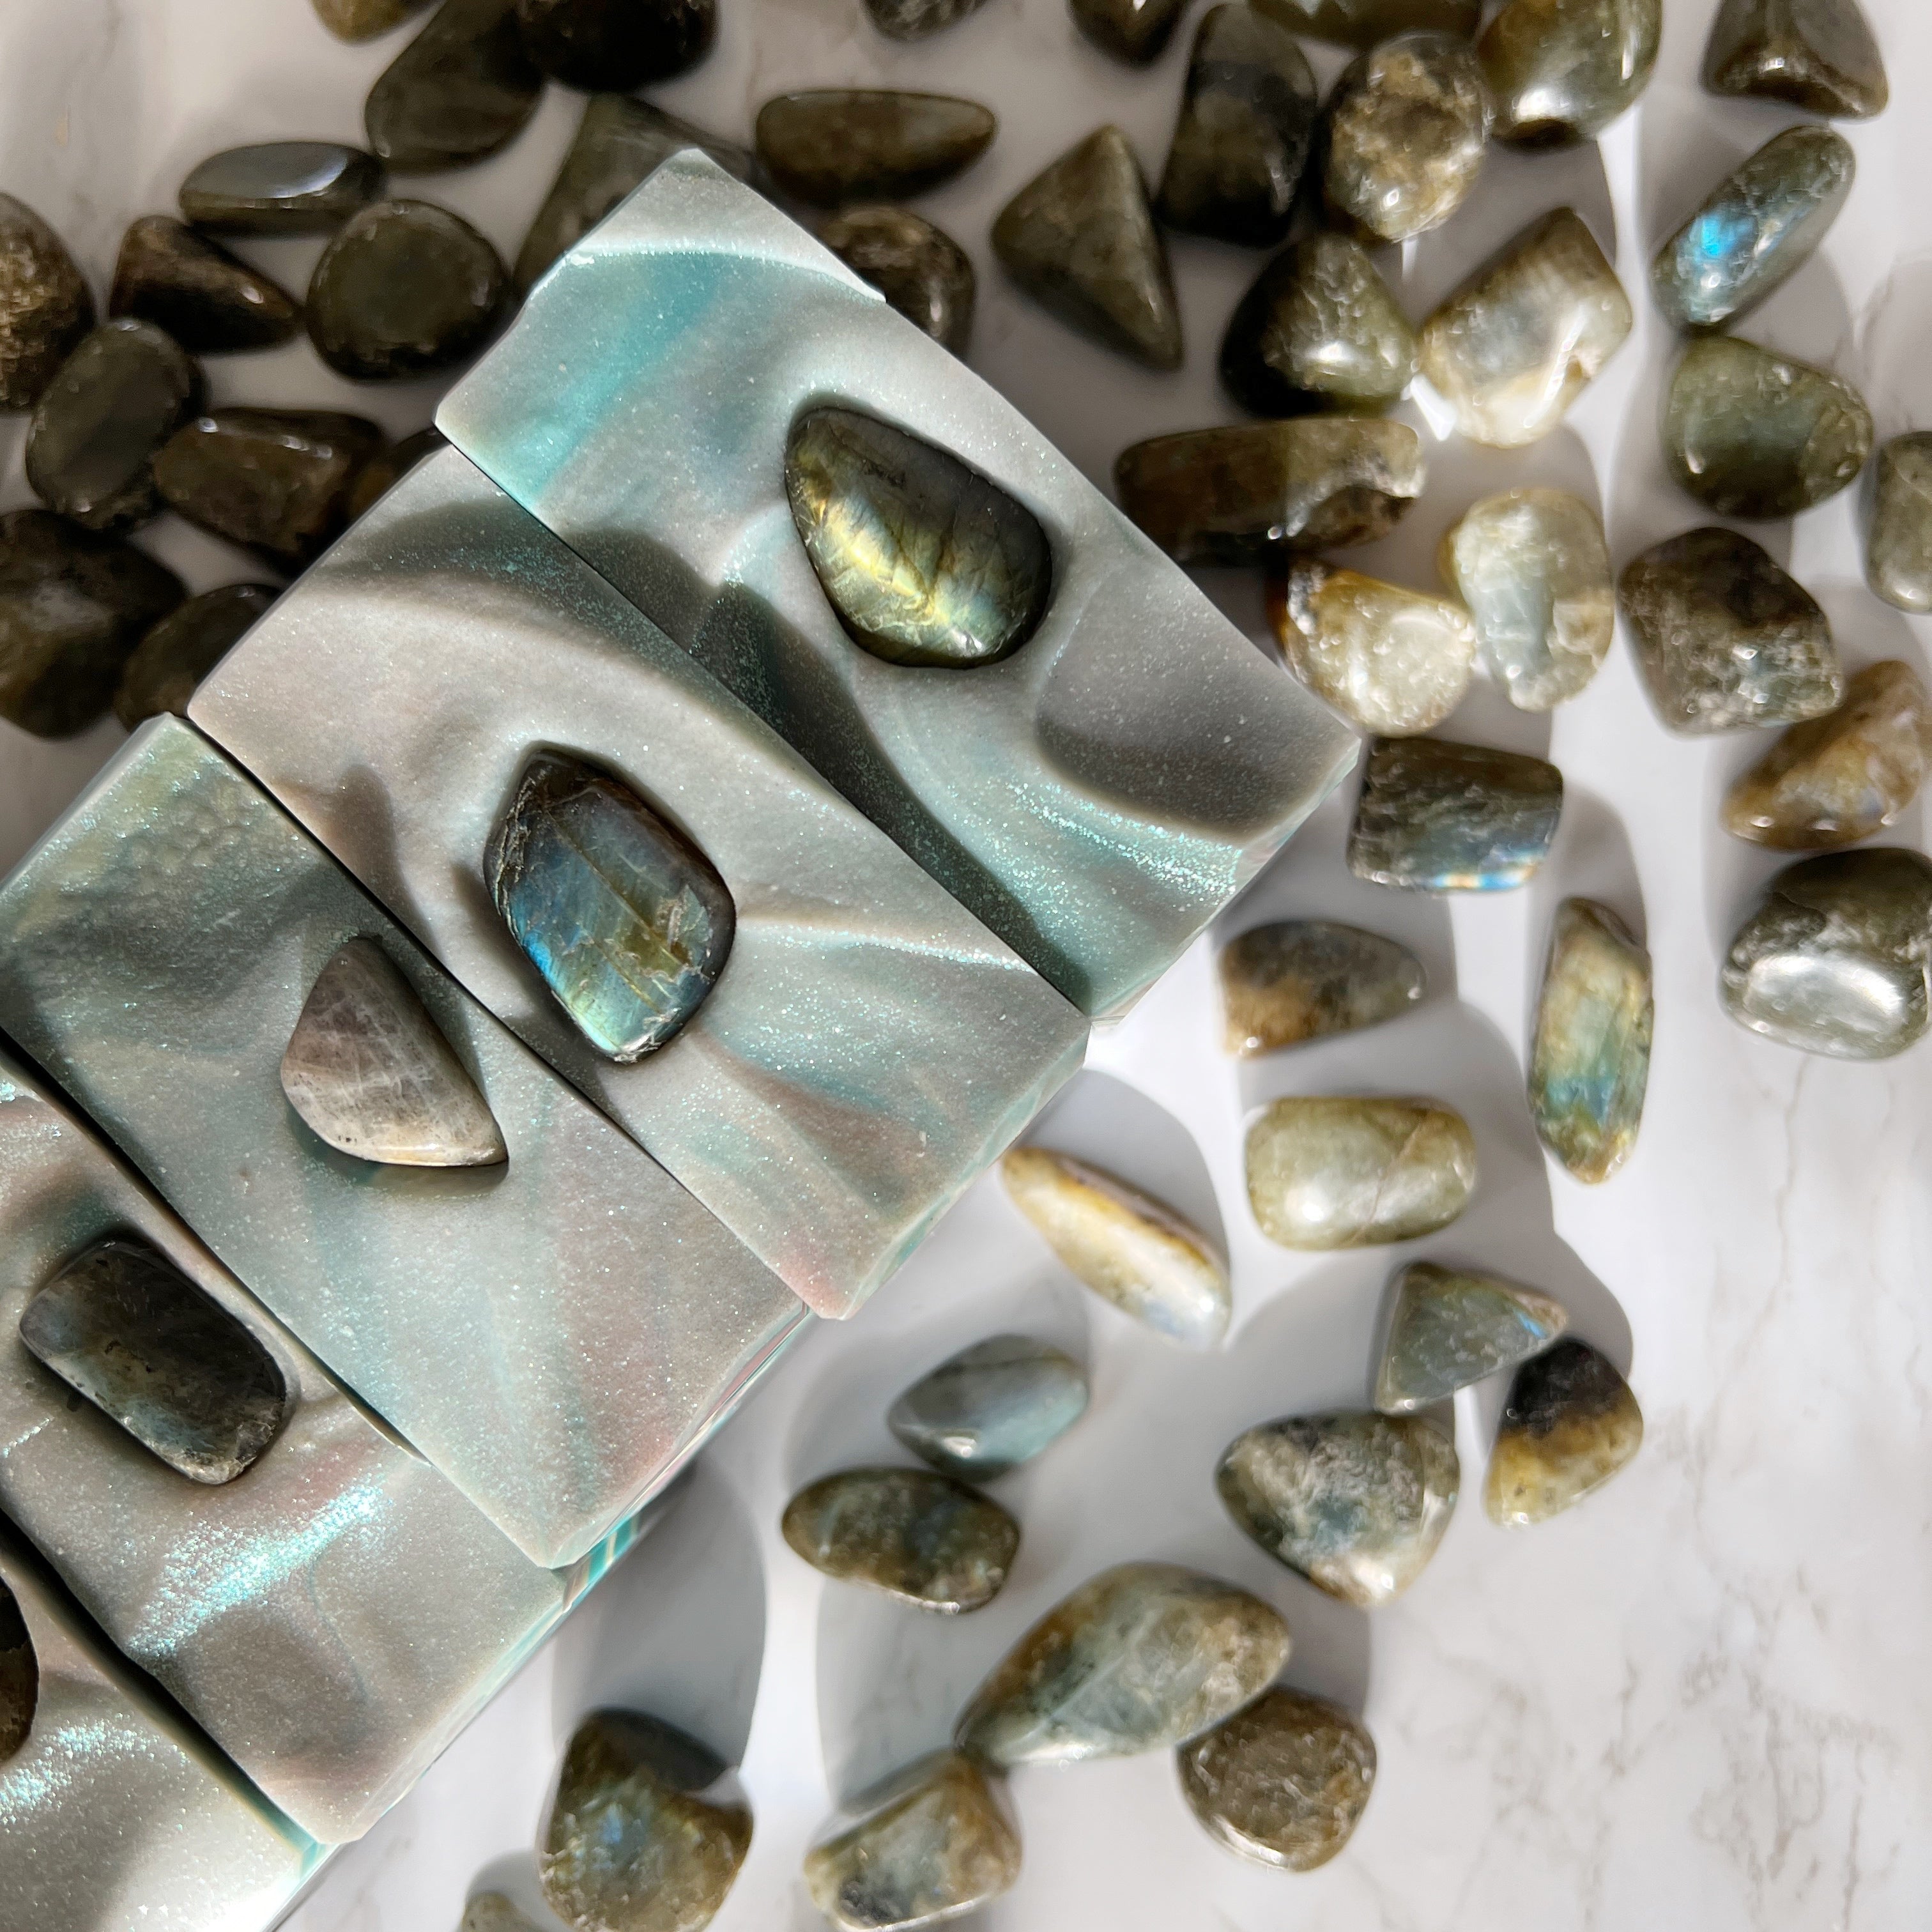 The most nourishing crystal soaps with genuine labradorite crystals